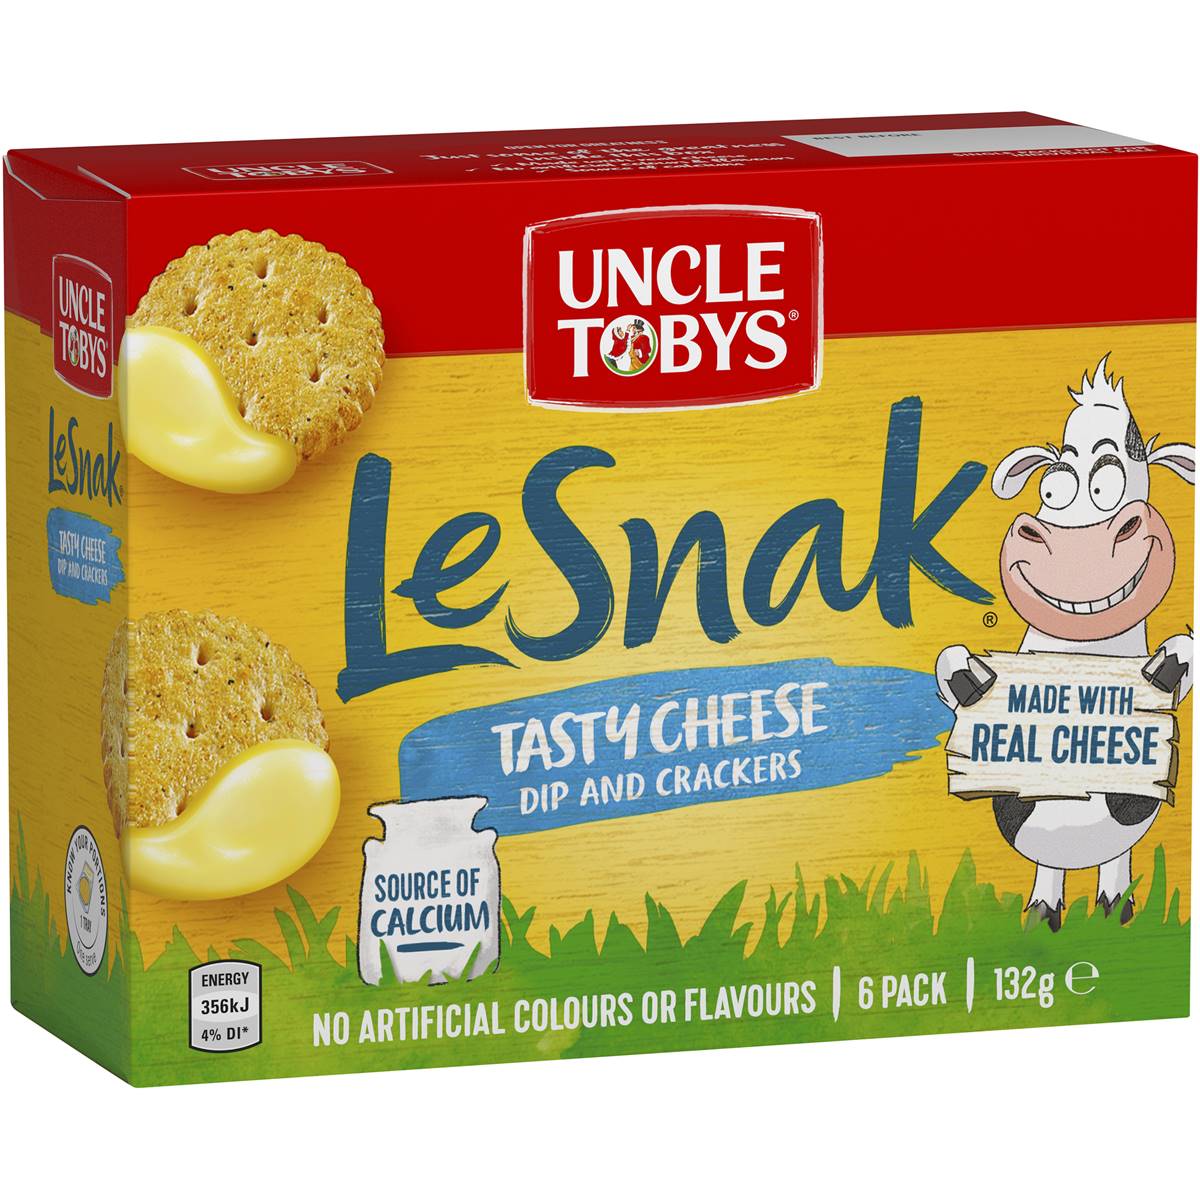 Calories in Uncle Tobys Le Snak Tasty Cheese Dip & Crackers